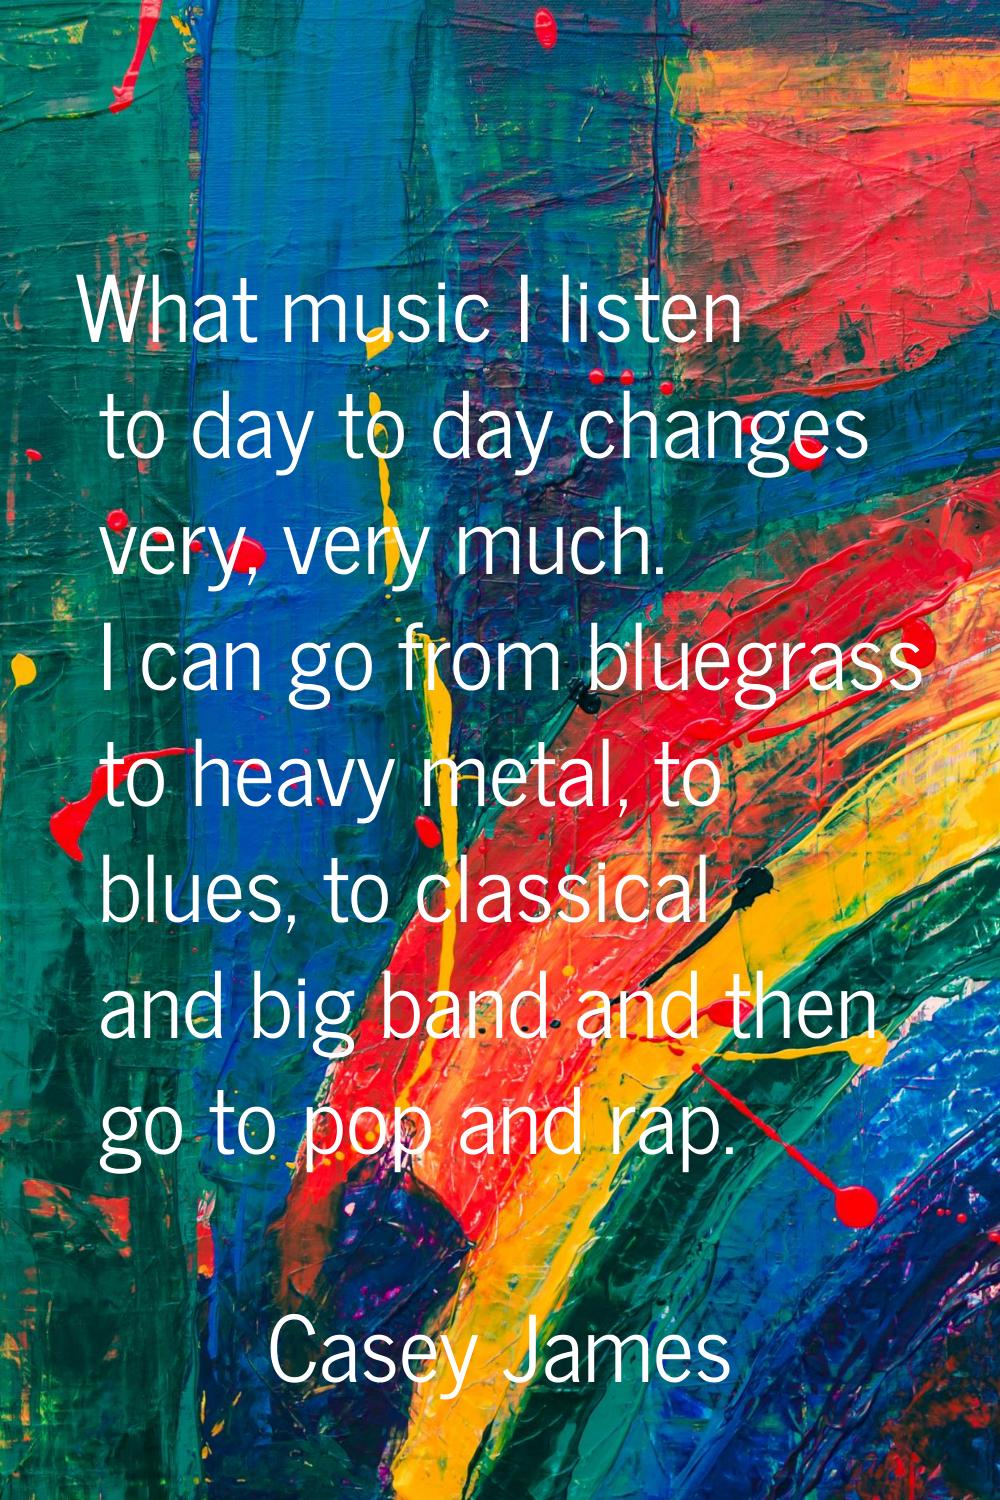 What music I listen to day to day changes very, very much. I can go from bluegrass to heavy metal, 